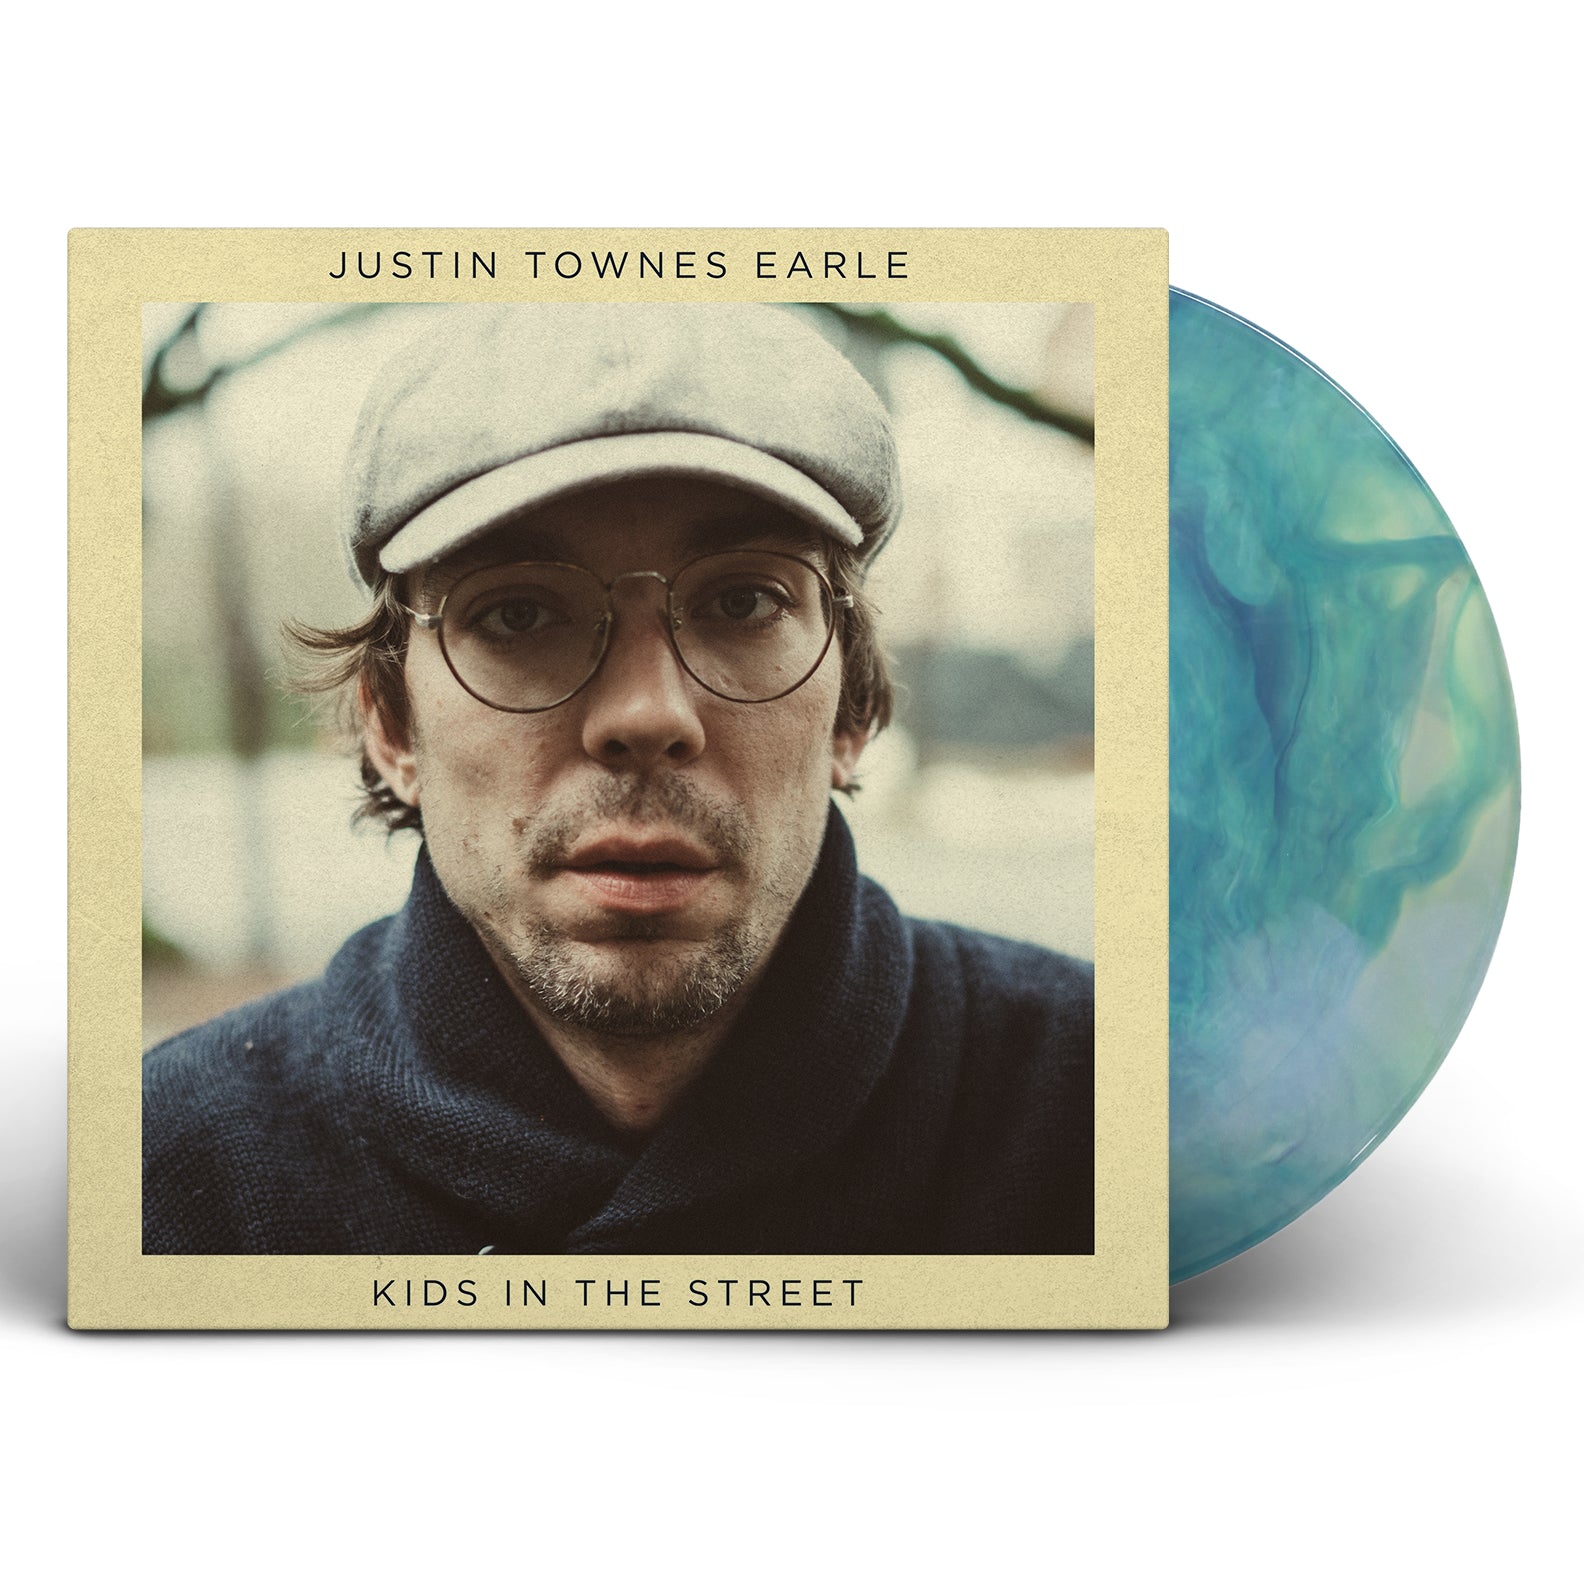 Justin Townes Earle - Kids In The Street [Black Friday Exclusive Color Vinyl]